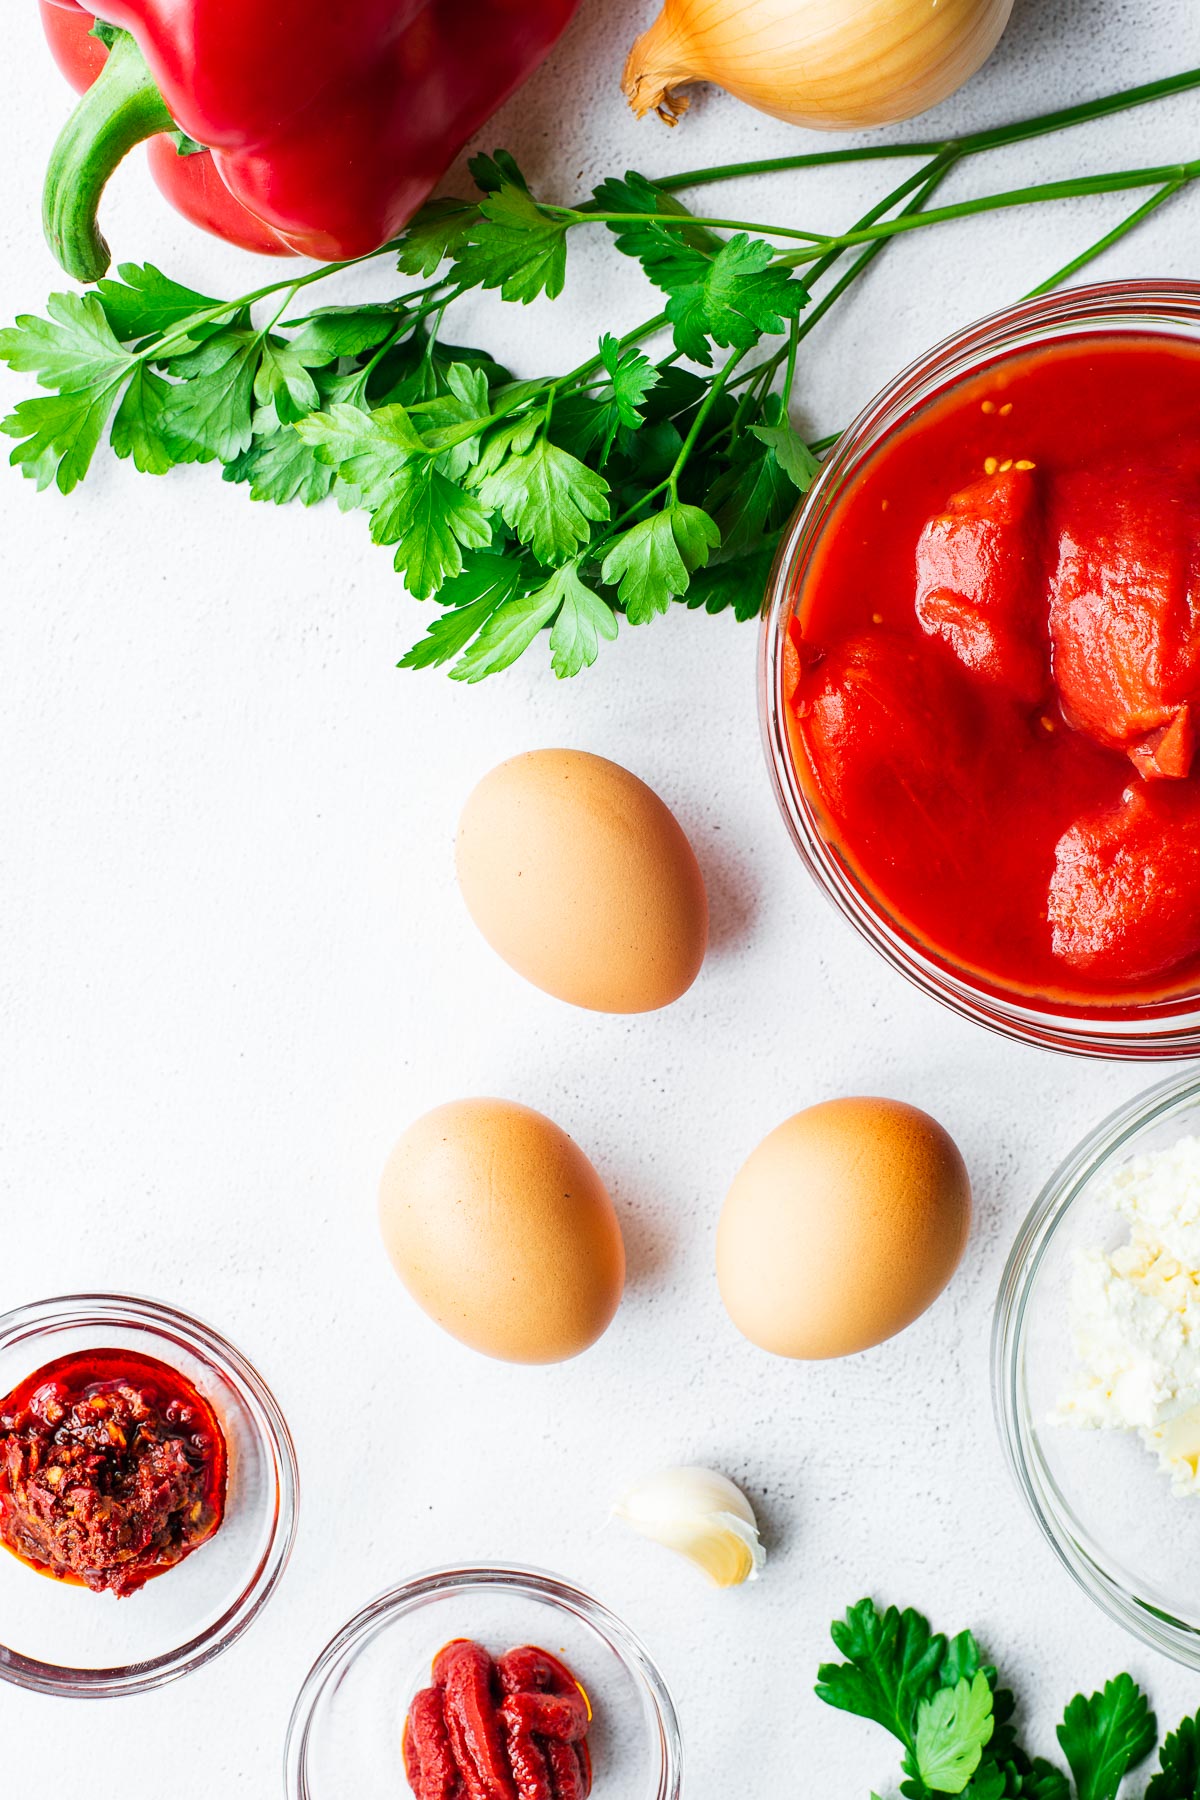 Whole eggs and shakshuka sauce ingredients arranged in a flatlay.